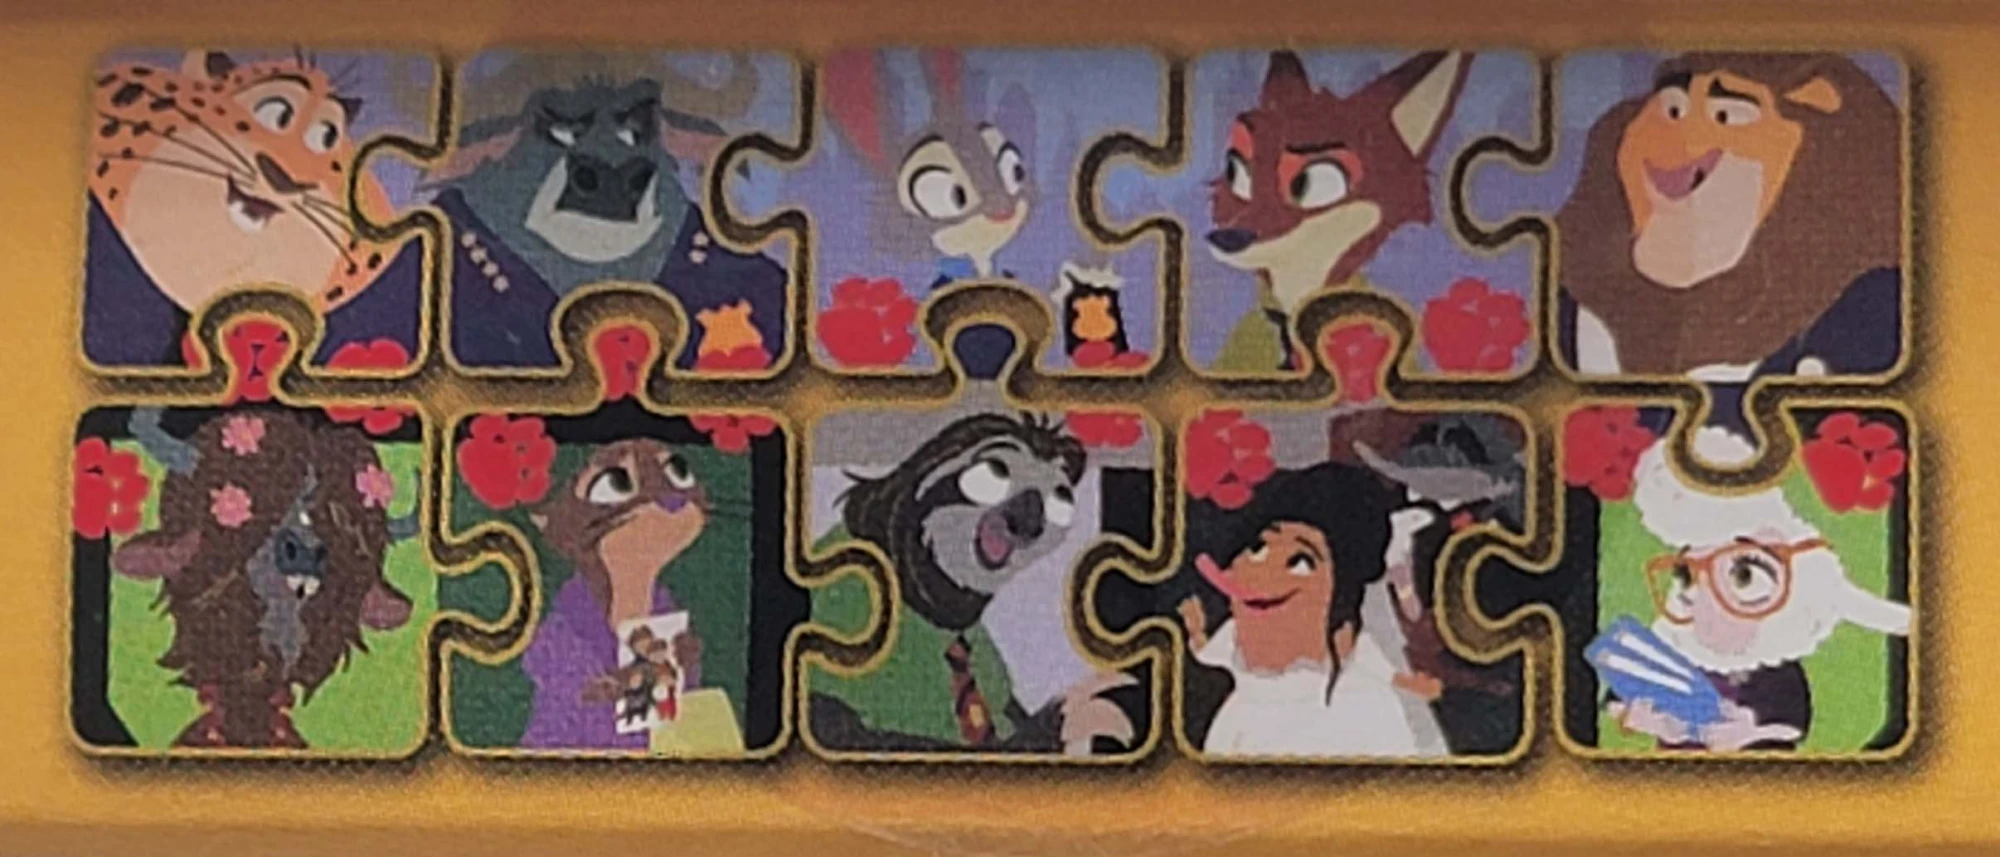 item Disney Pin - Zootopia - Mystery Pin - Character Connection Puzzle - 1 Pin 152232a